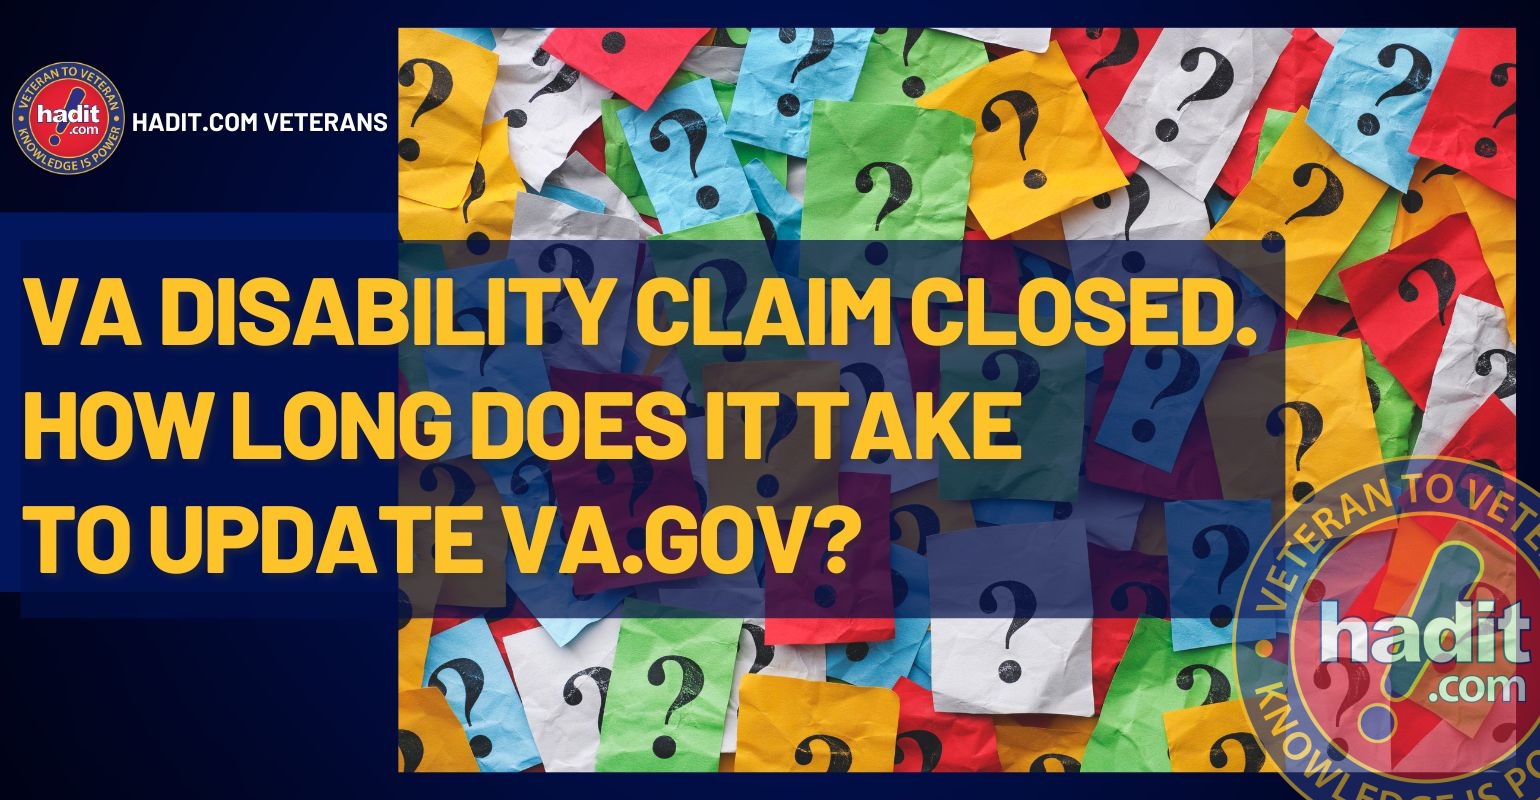 An image featuring a collage of colorful papers with question marks, with text overlay that reads, "VA DISABILITY CLAIM CLOSED. HOW LONG DOES IT TAKE TO UPDATE VA.GOV?" with "hadit.com VETERANS" and "VETERAN TO VETERAN KNOWLEDGE PORTAL hadit.com" logos on the left and right sides respectively.